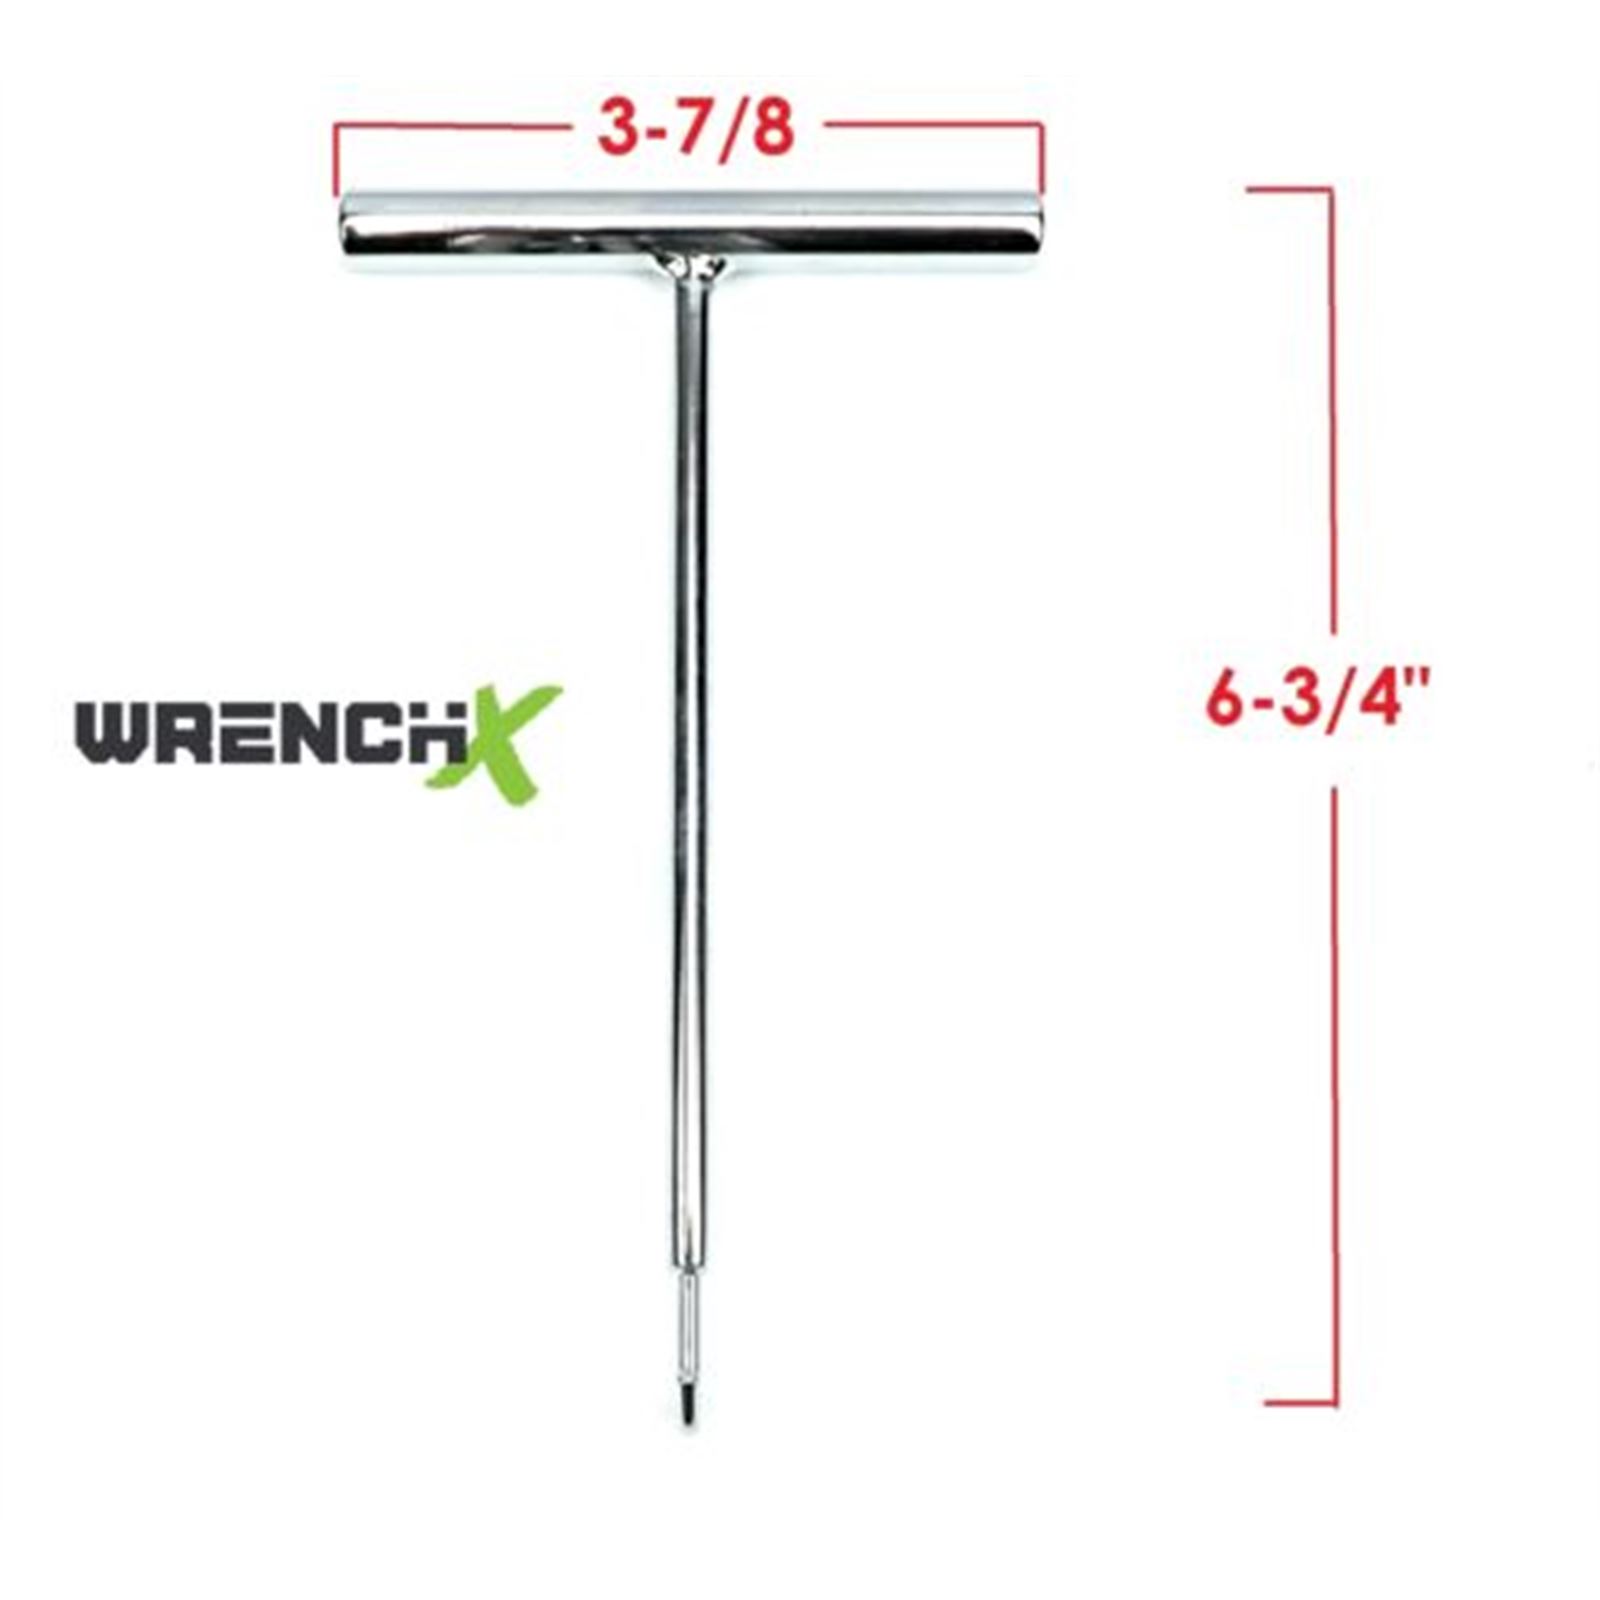 Wrench-X Products Heavy Duty Chrome T-Handle Spring Hook Puller